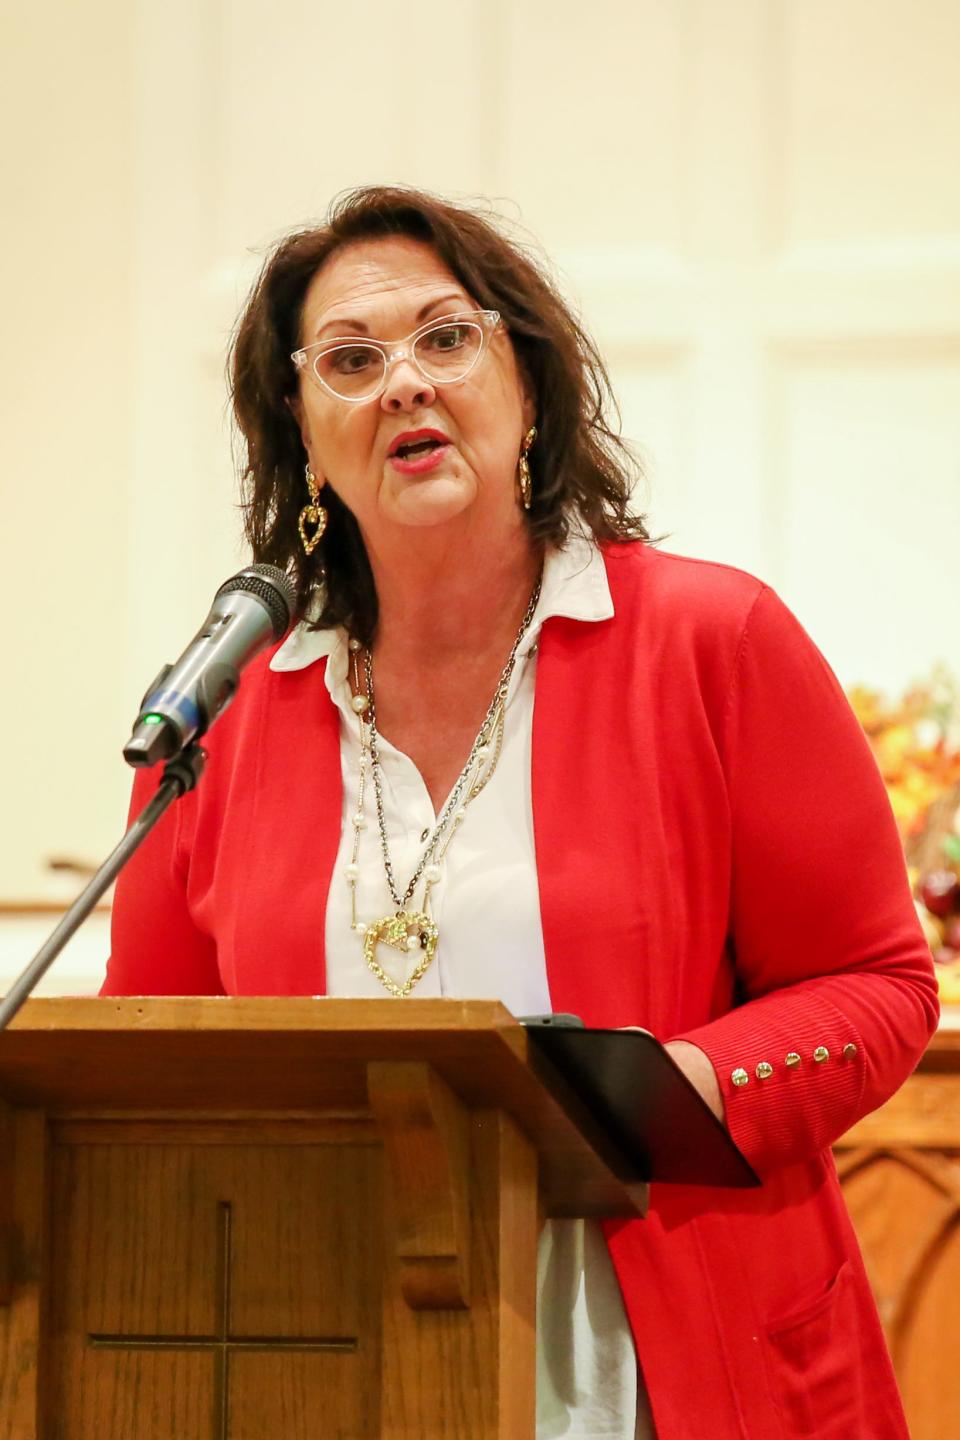 Julie Cook emceed the flag ceremony at the 15th annual Flags of Freedom fundraiser for the Carl Perkins Center for the Prevention of Child Abuse. The event was hosted by the Jackson Exchange Club and held at the First Cumberland Presbyterian Church in Jackson, Tenn. November 15, 2022.